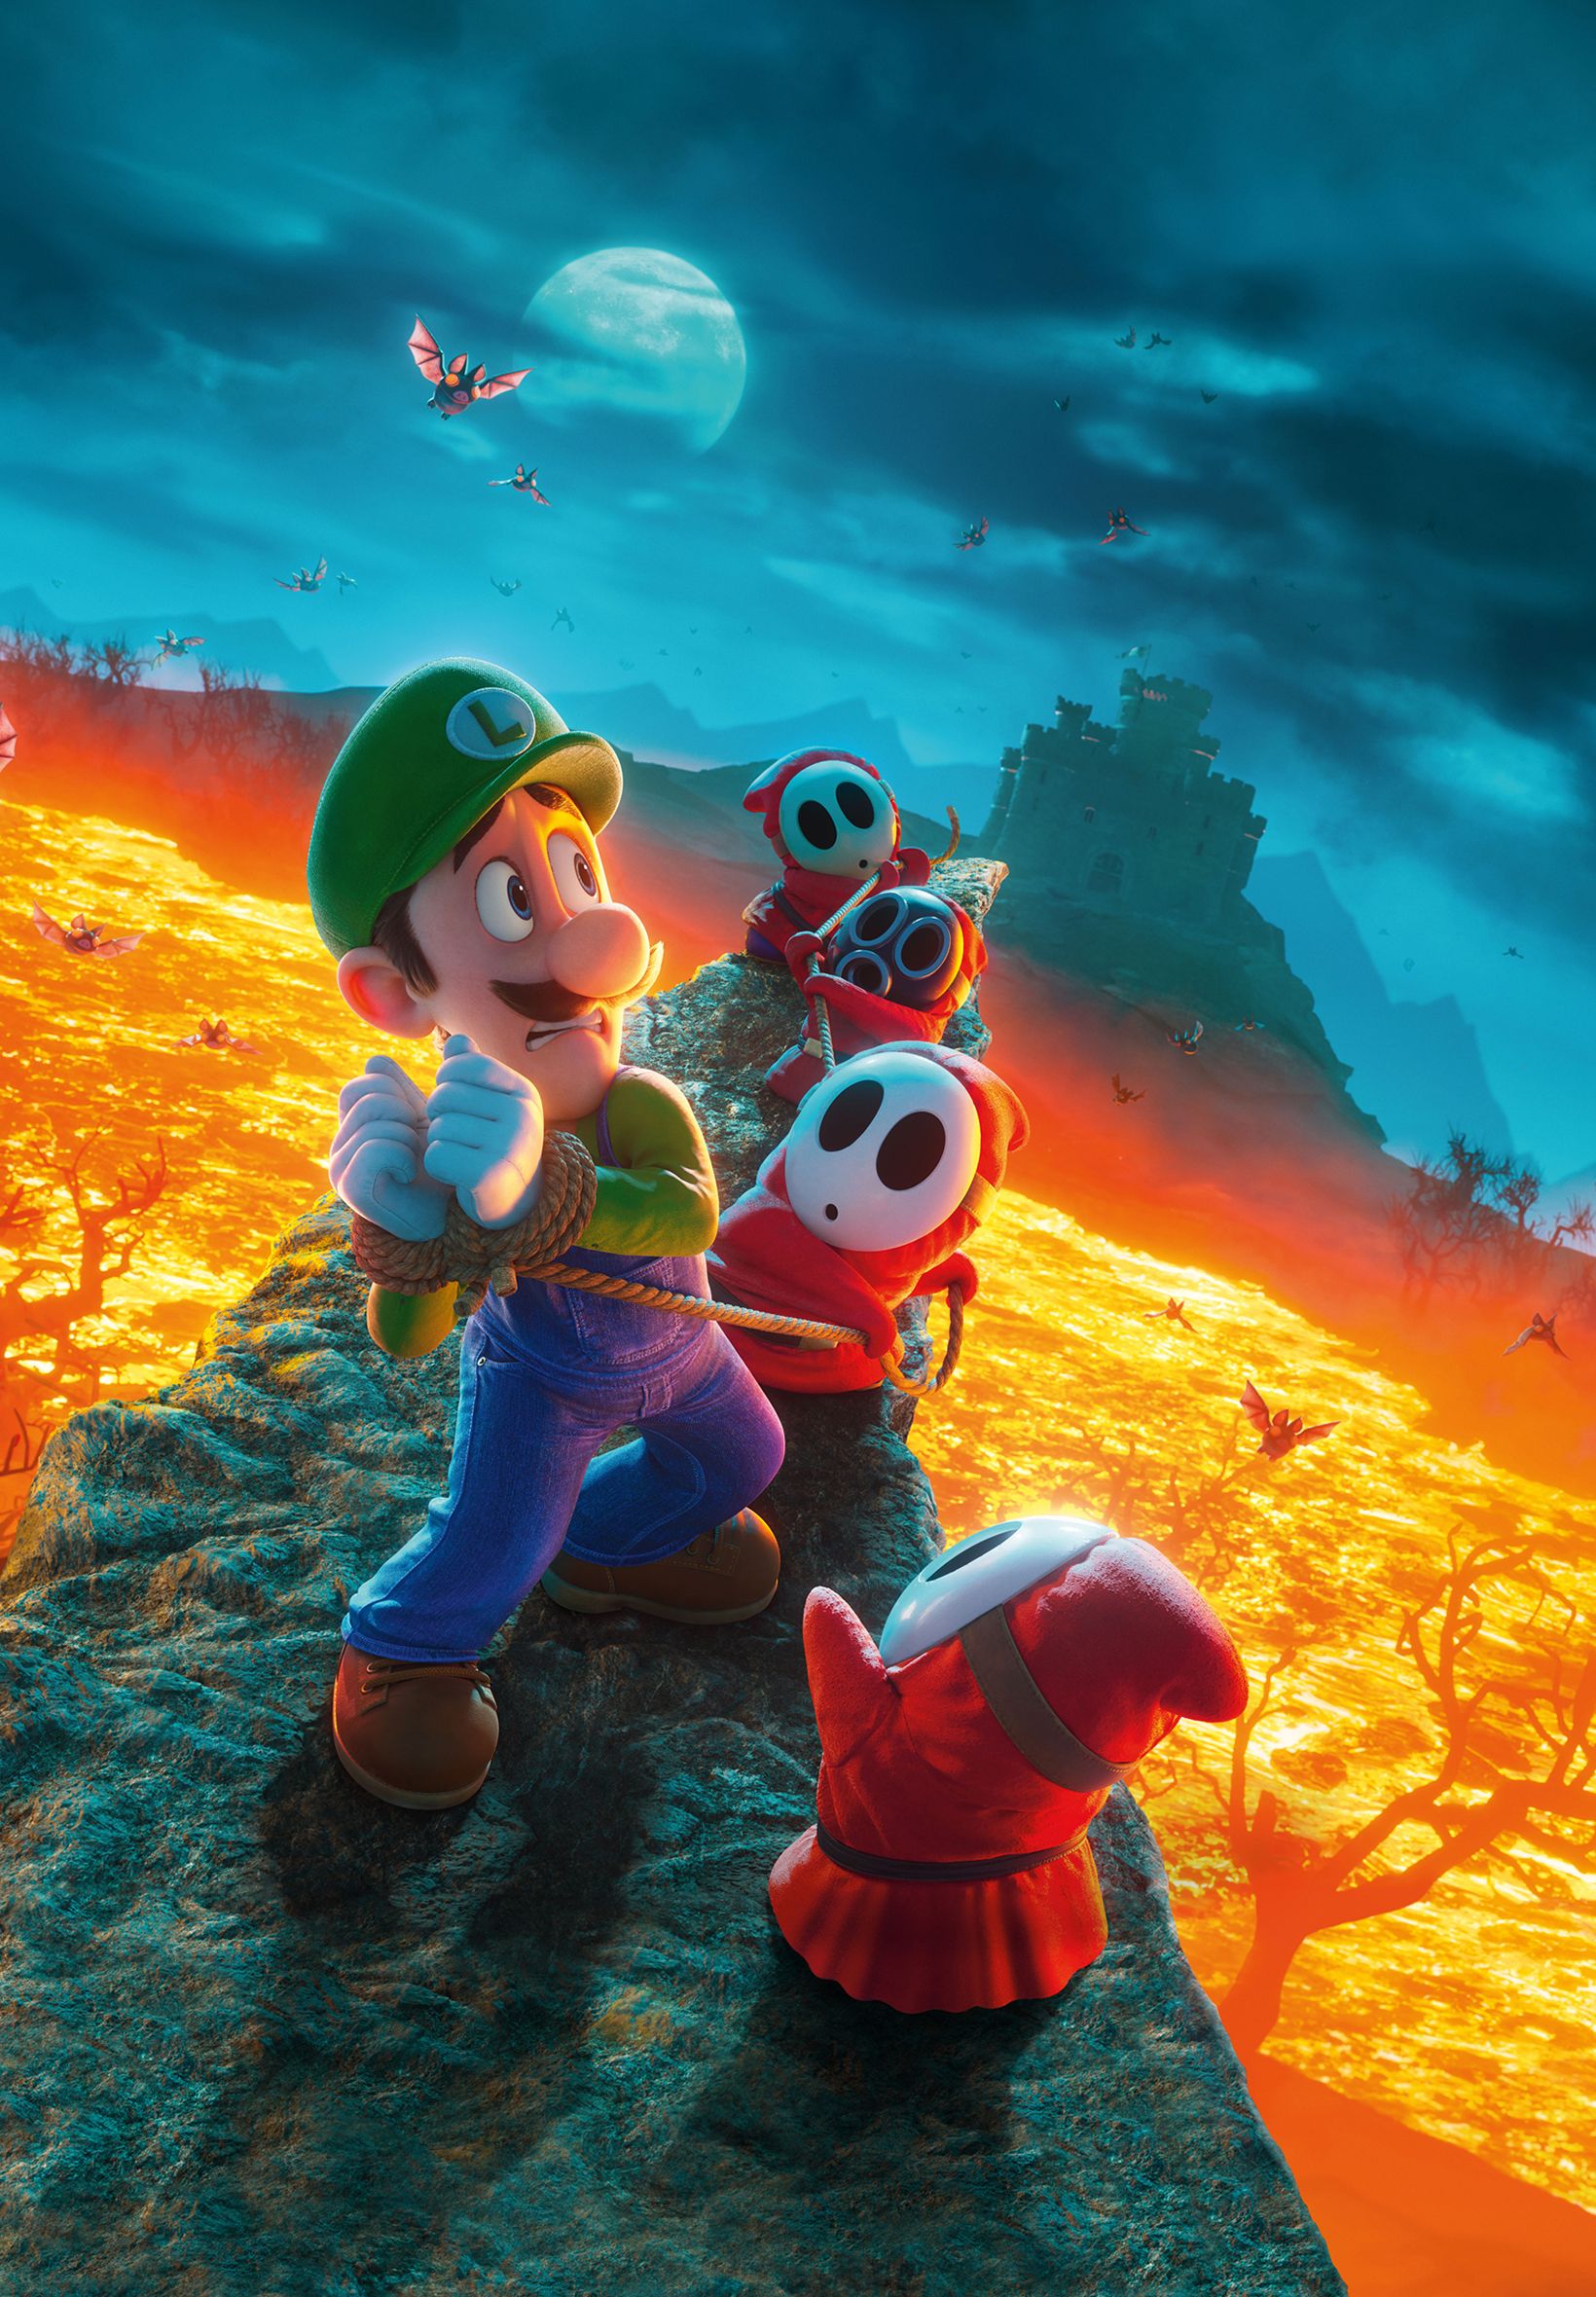 A scene from the Super Mario 3D World + Bowser's Fury game. Mario, Luigi, and Cappy are standing on a hill with a castle in the background. - Super Mario